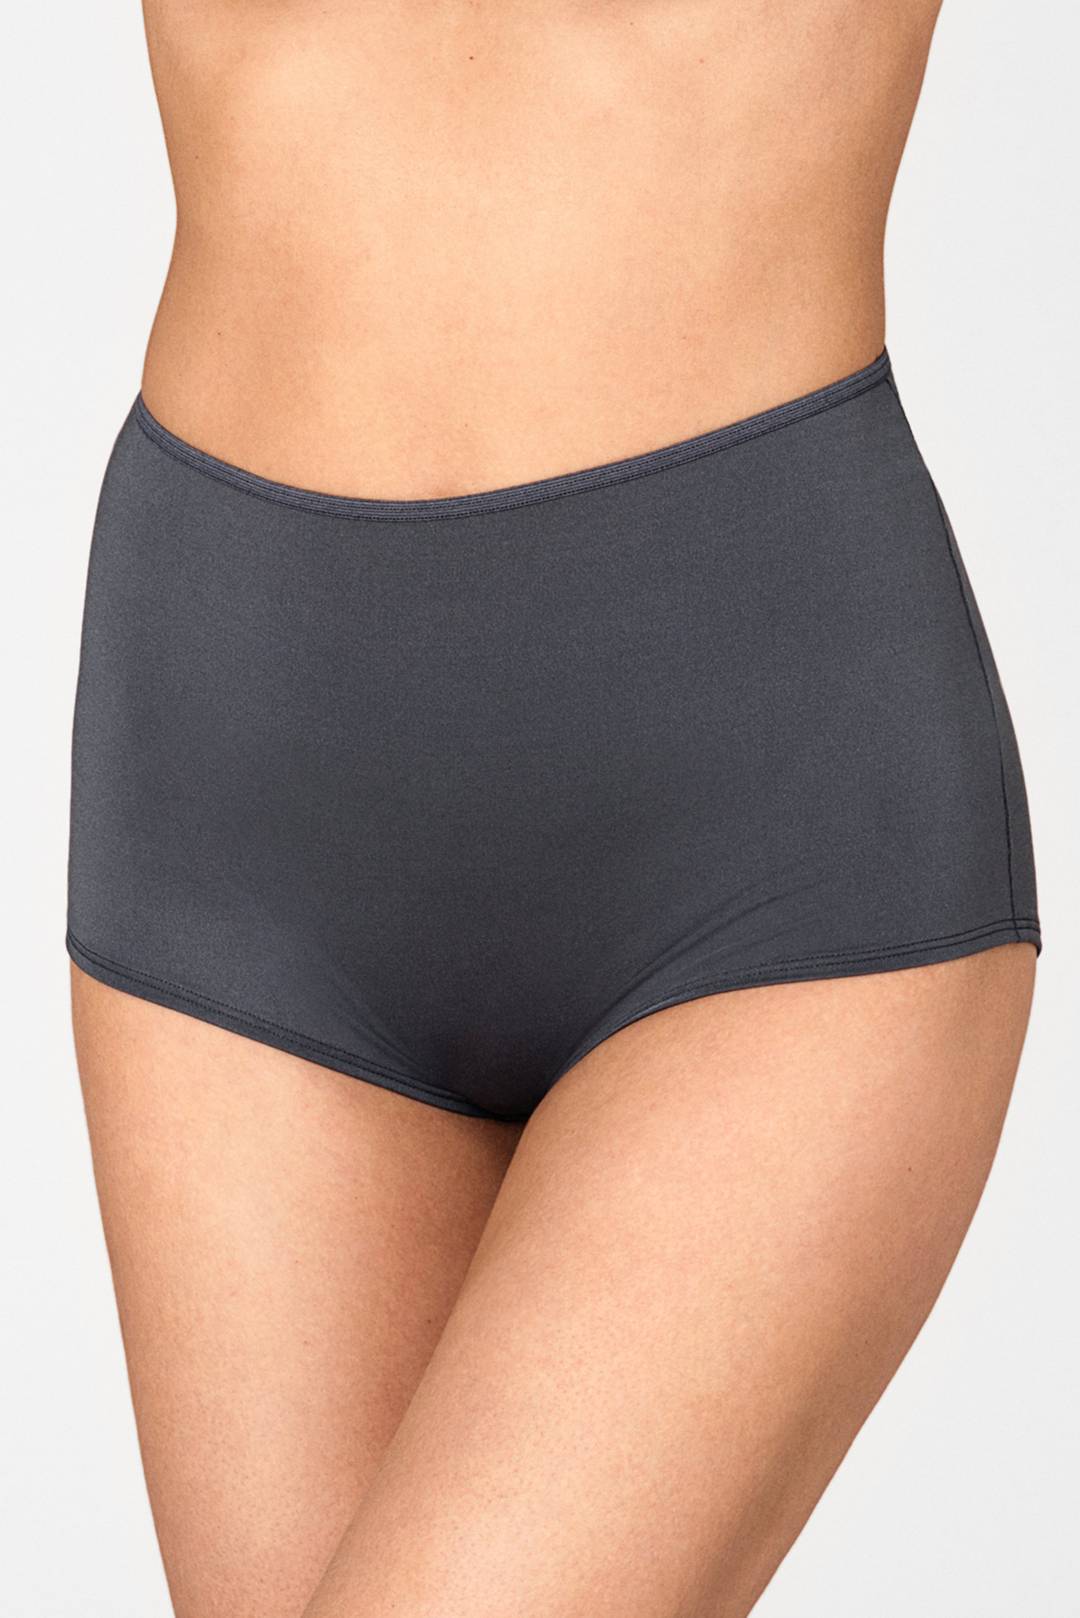 Basic Cotton boxer panty - Made of high-quality breathable cotton